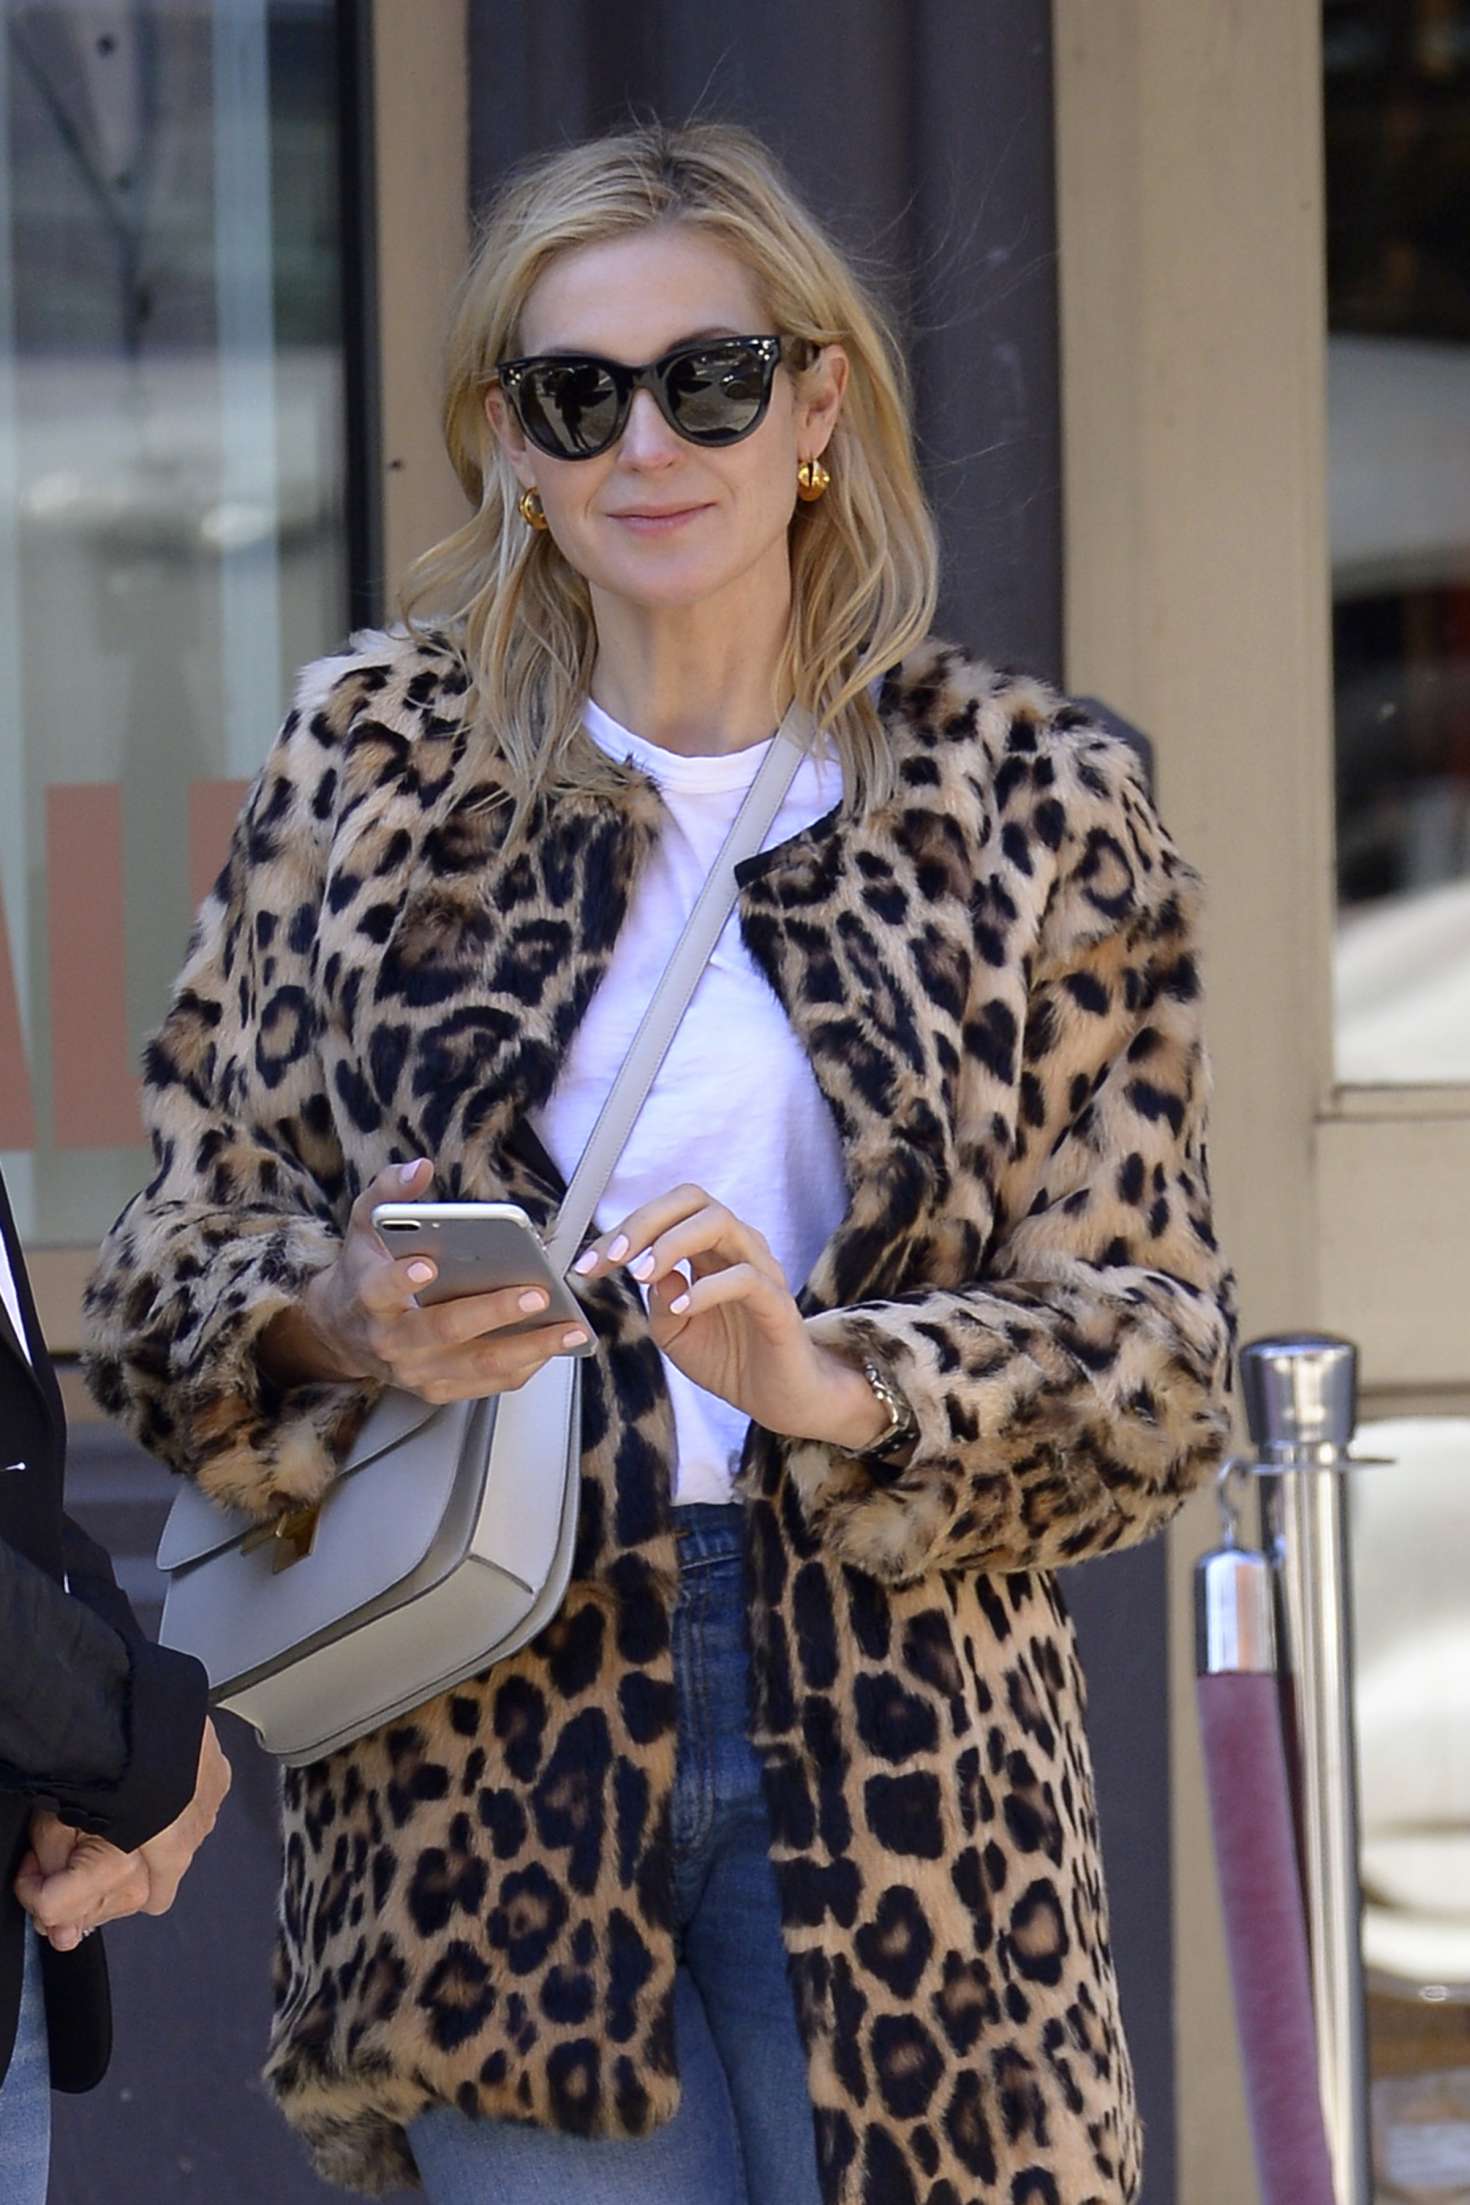 Kelly Rutherford in Leopard fur coat at Cipriani's in NY